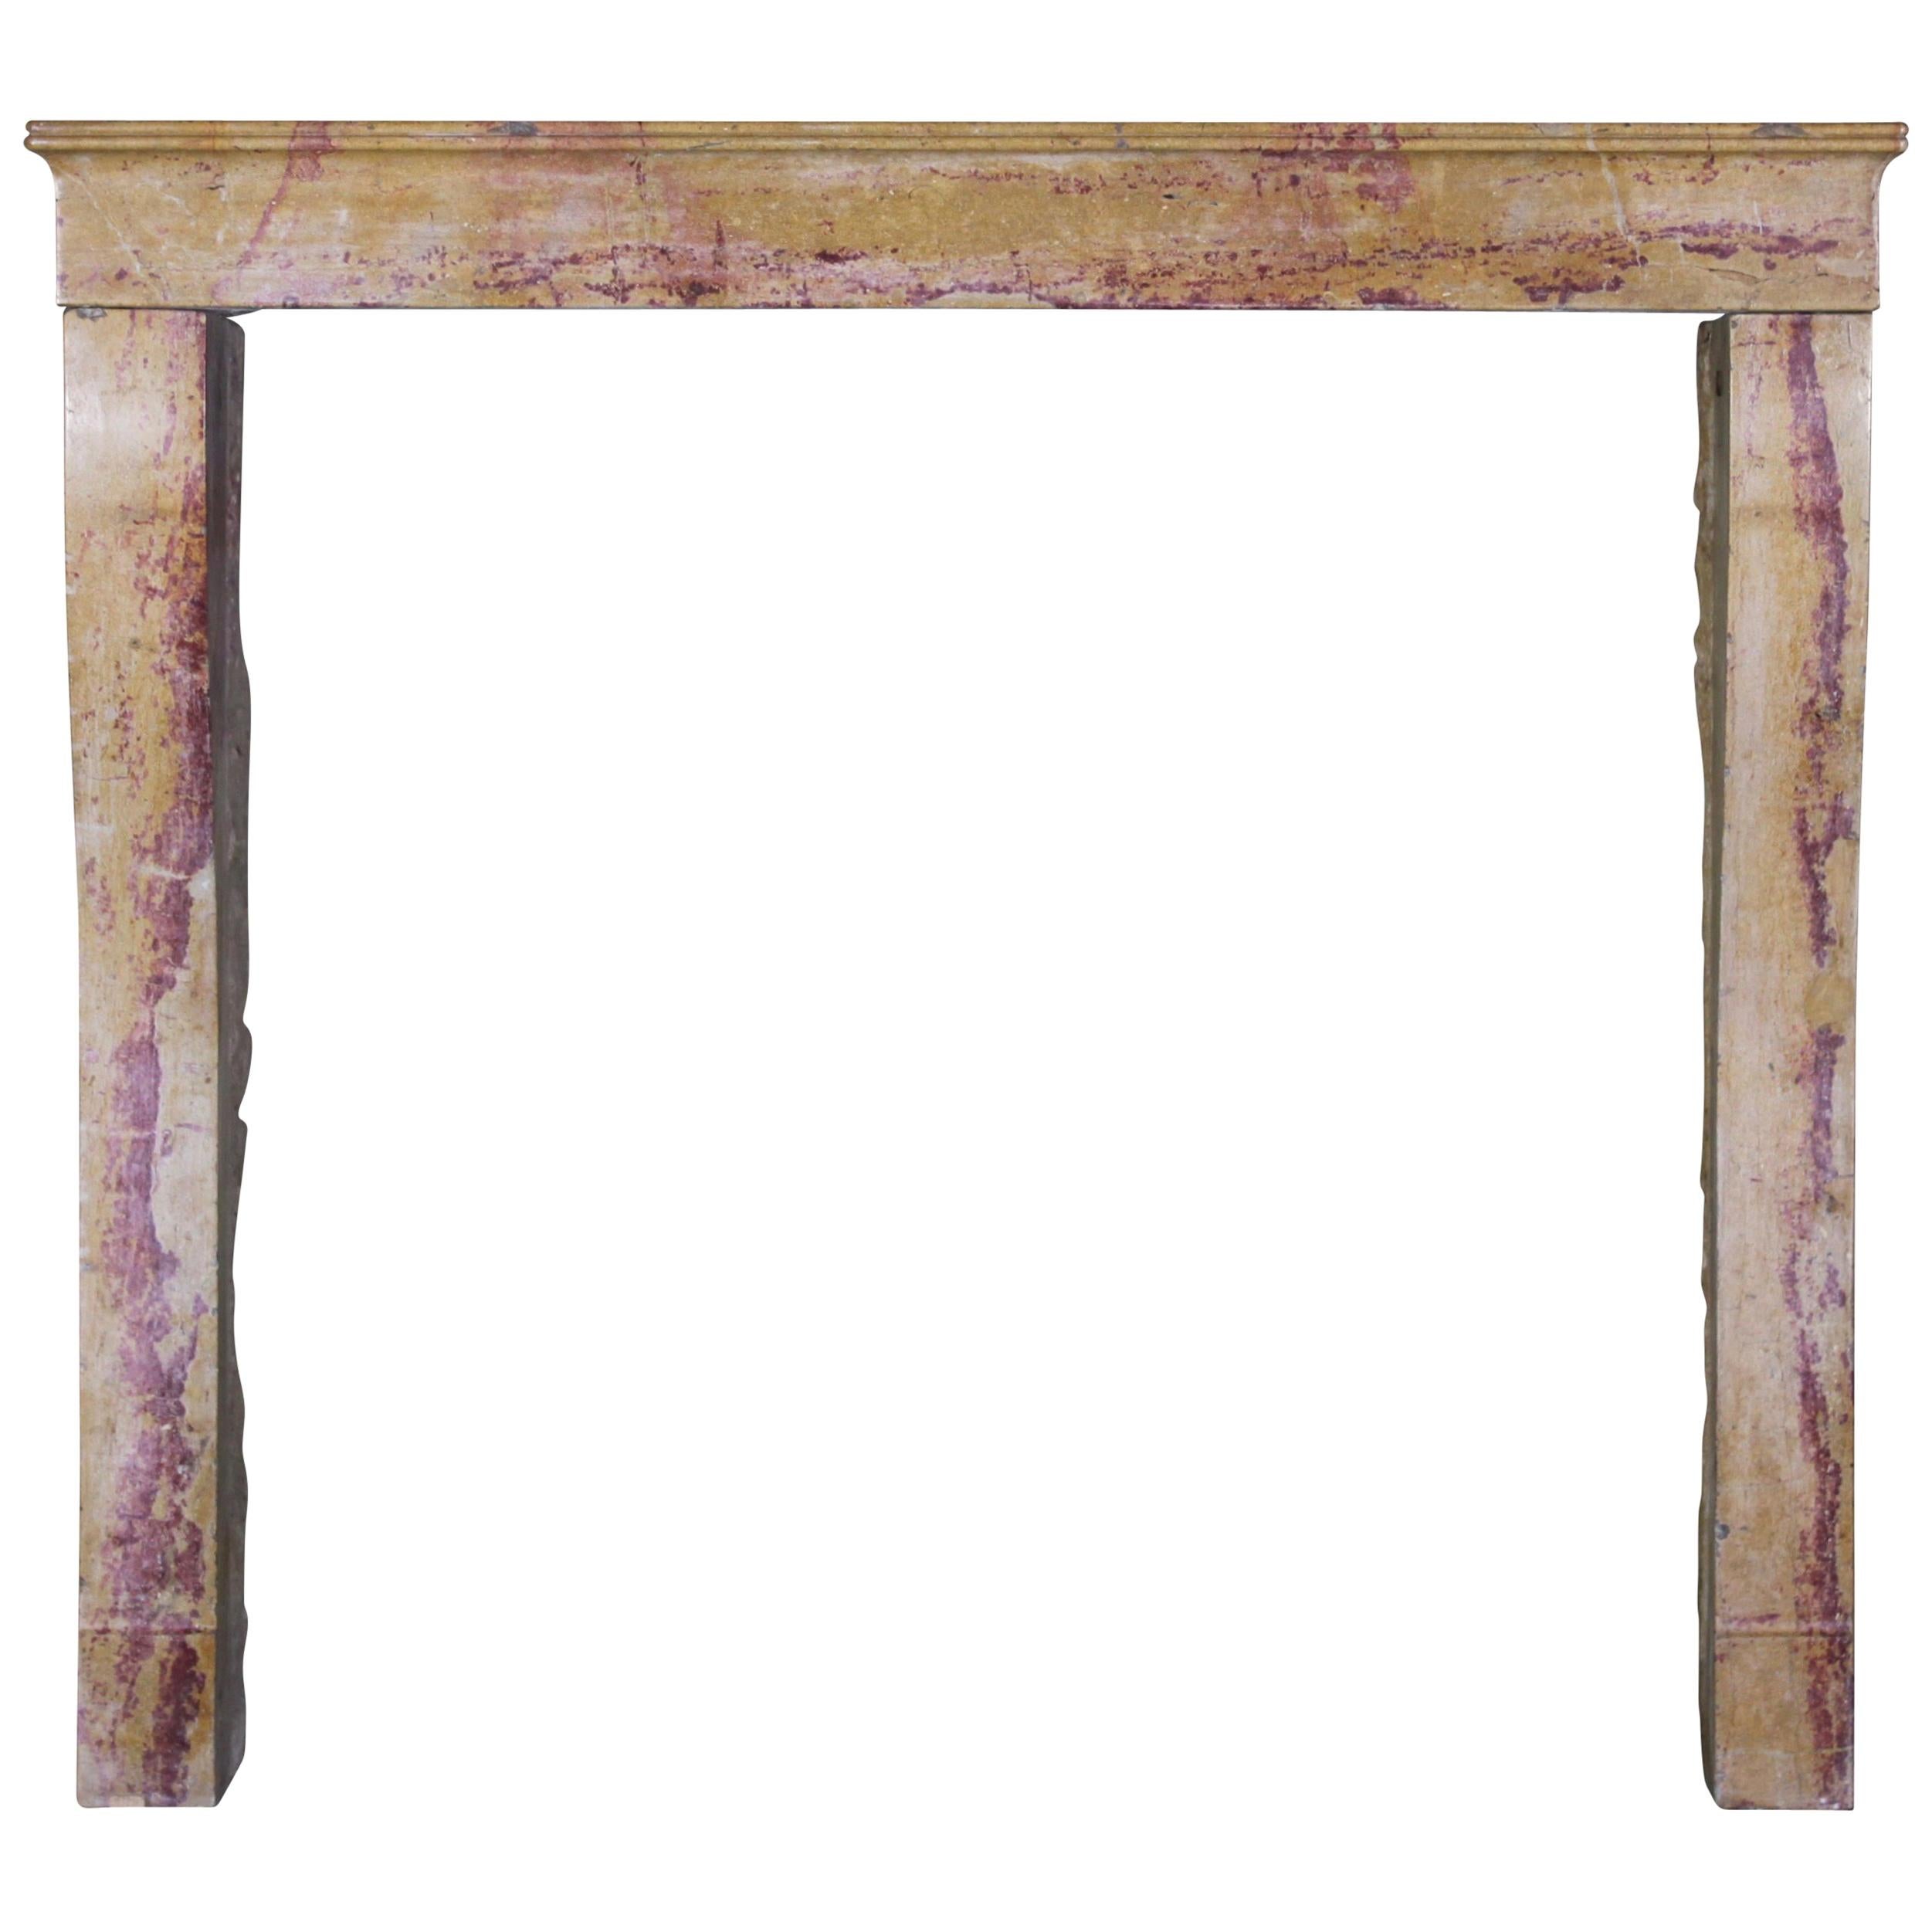 19th Century French Designed by Nature Stone Antique Fireplace Surround